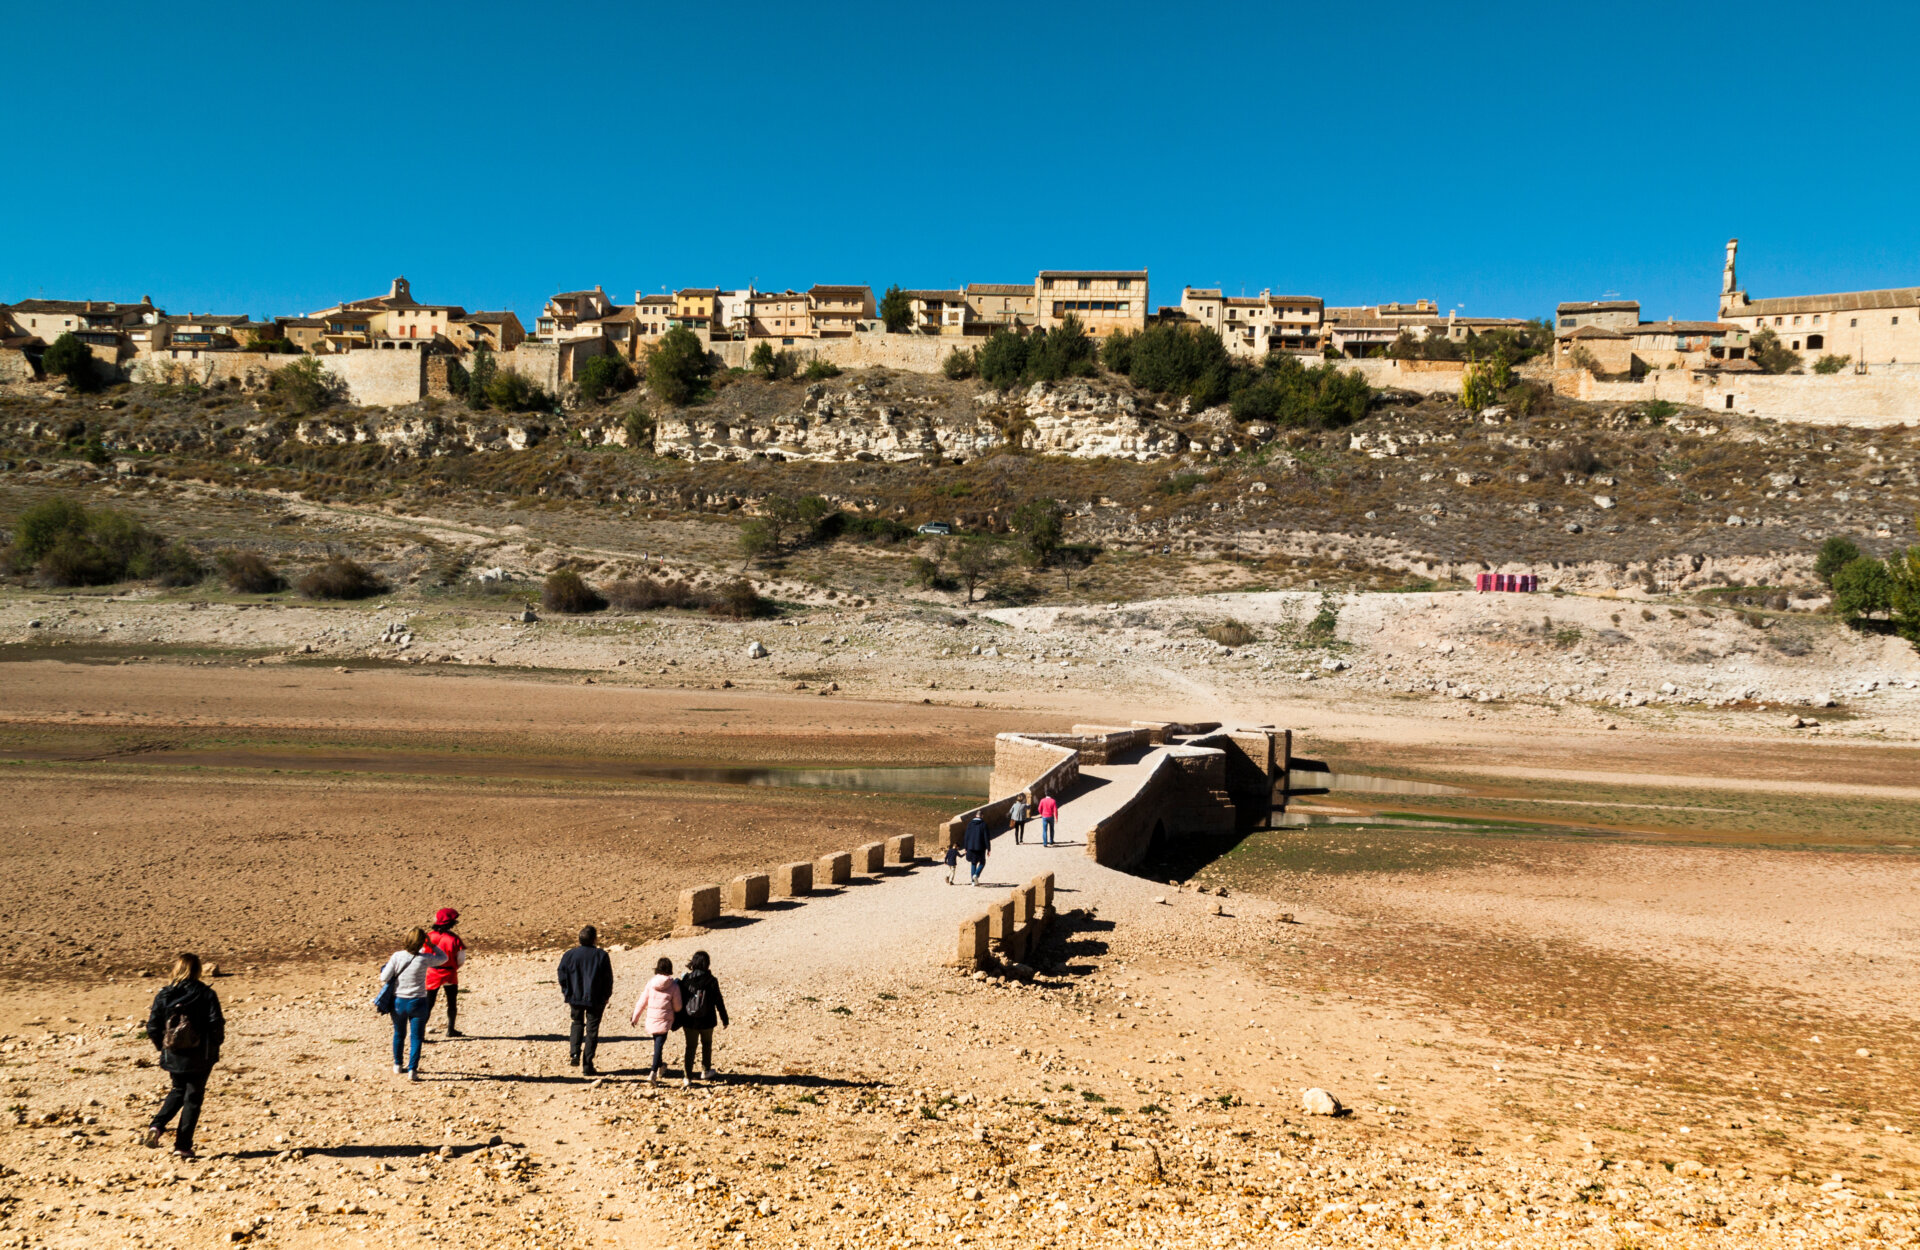 The image shows a group of people crossing a bridge over a dry river in Segovia, Spain. In the background, there is a dry mountain with a small village on the top.